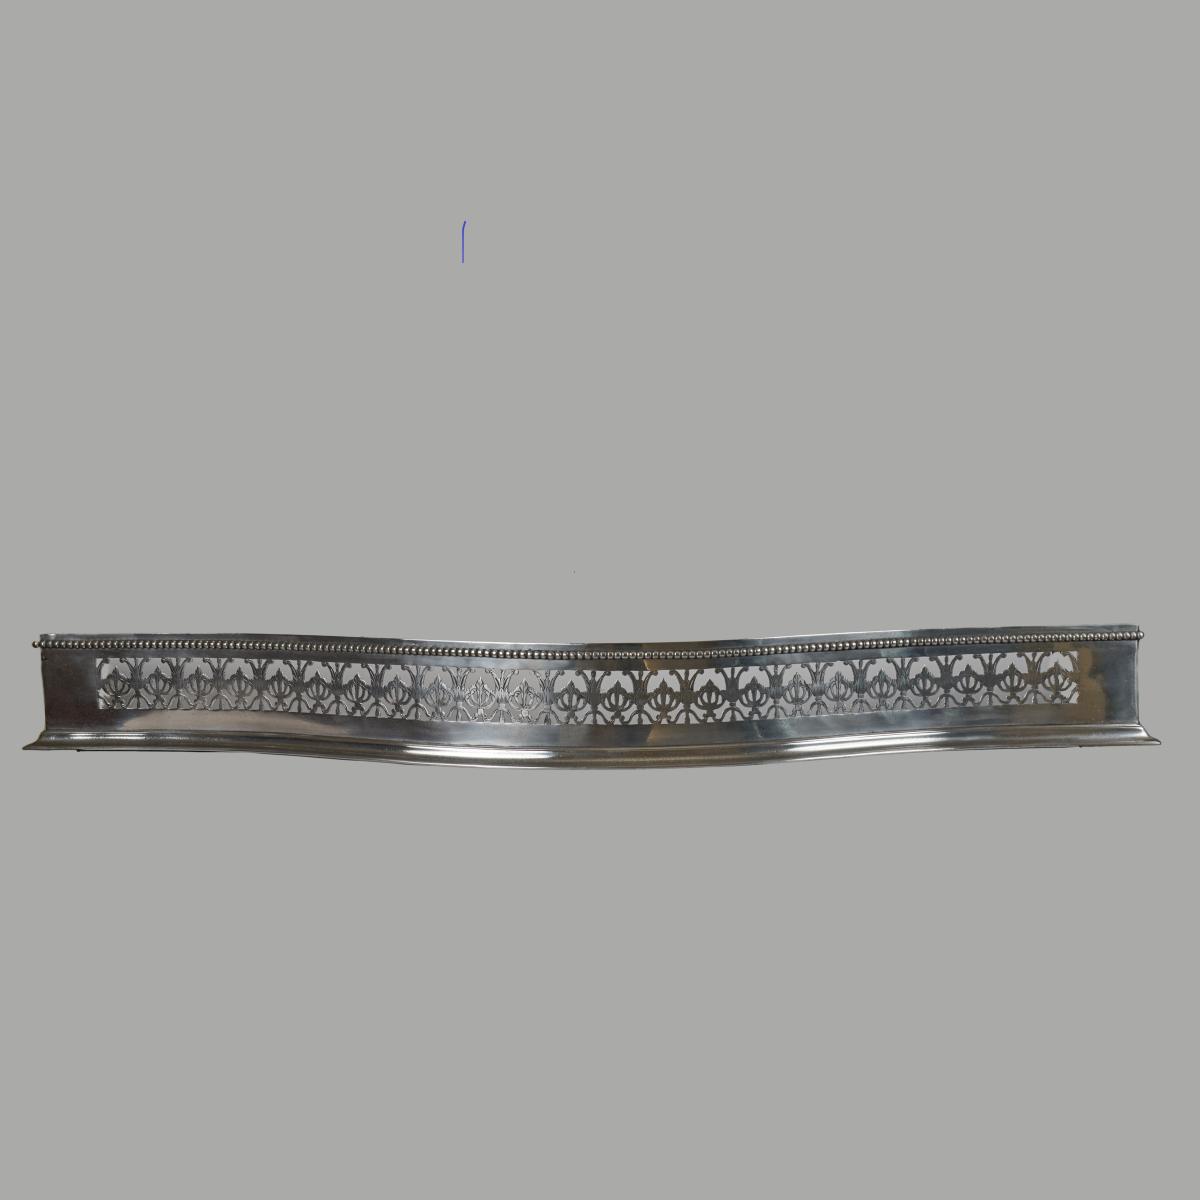 English pierced and engraved steel fender